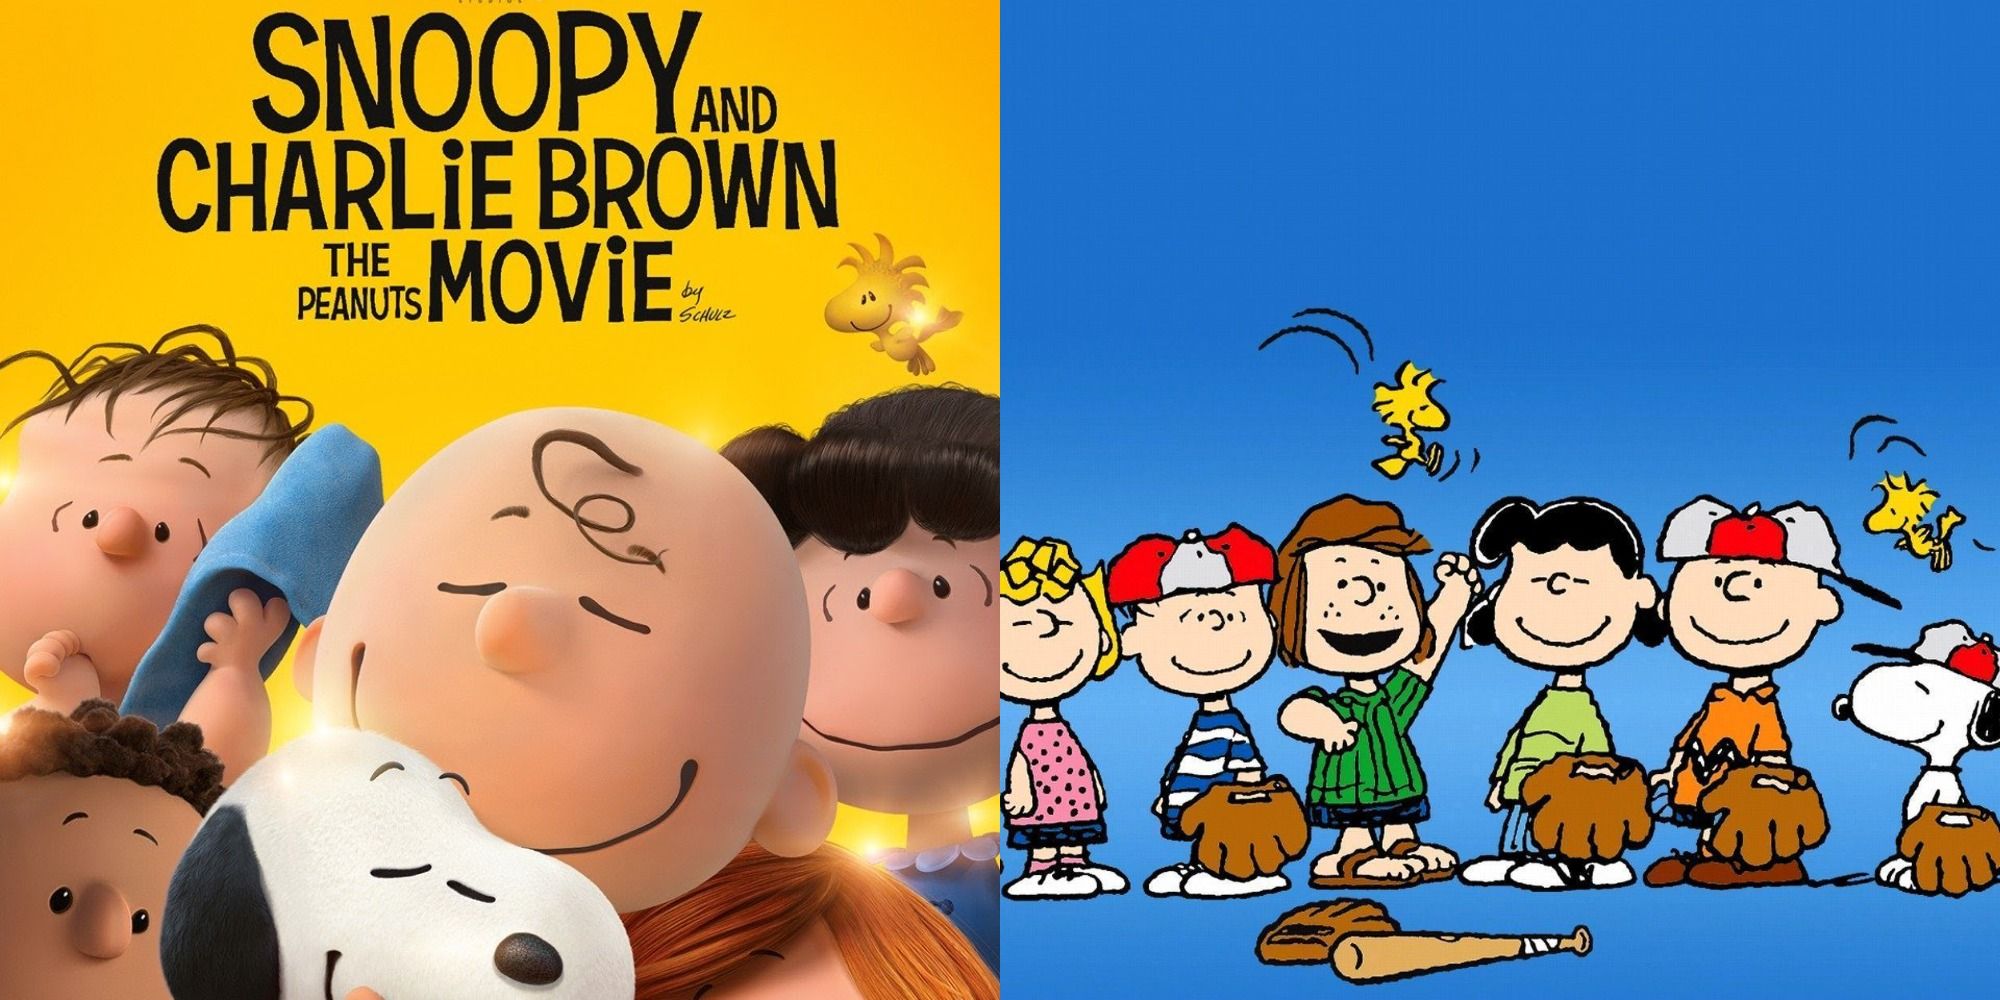 combined image of the Peanuts characters in comics and the poster The Peanuts Movie